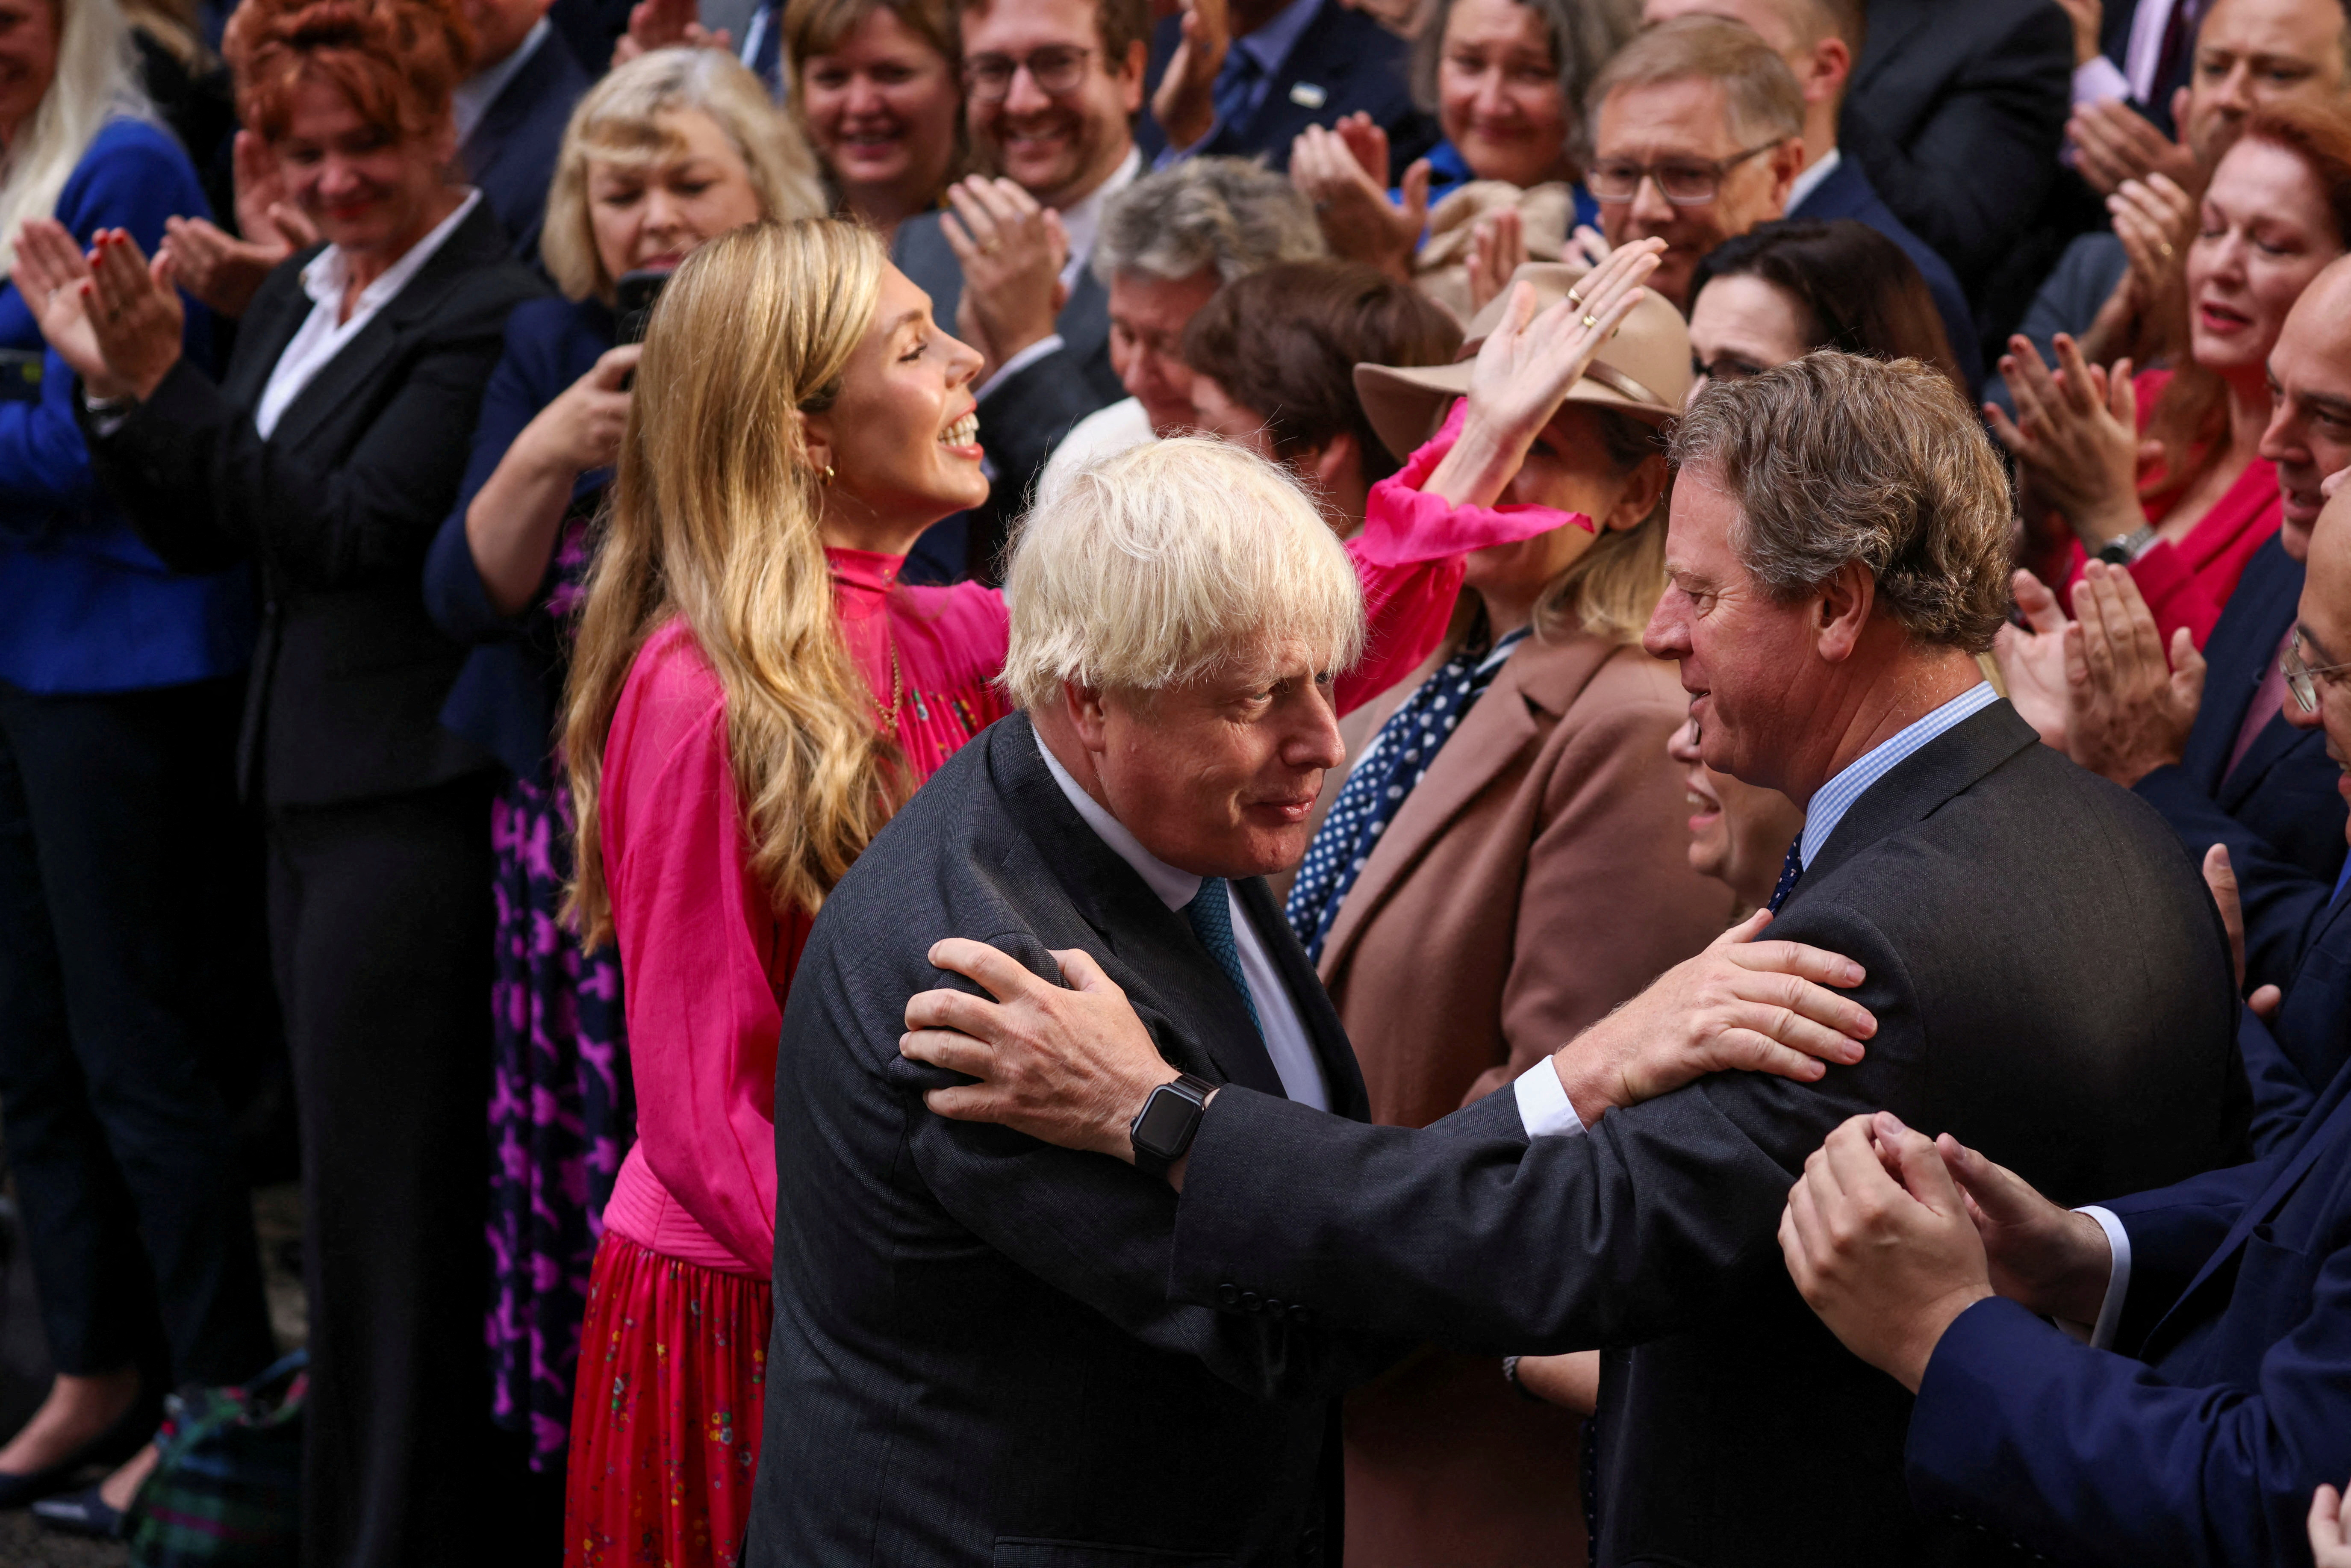 Outgoing British Prime Minister Boris Johnson greets people with his wife Carrie Johnson after delivering a speech on his last day in office outside Downing Street (REUTERS/Henry Nicholls).